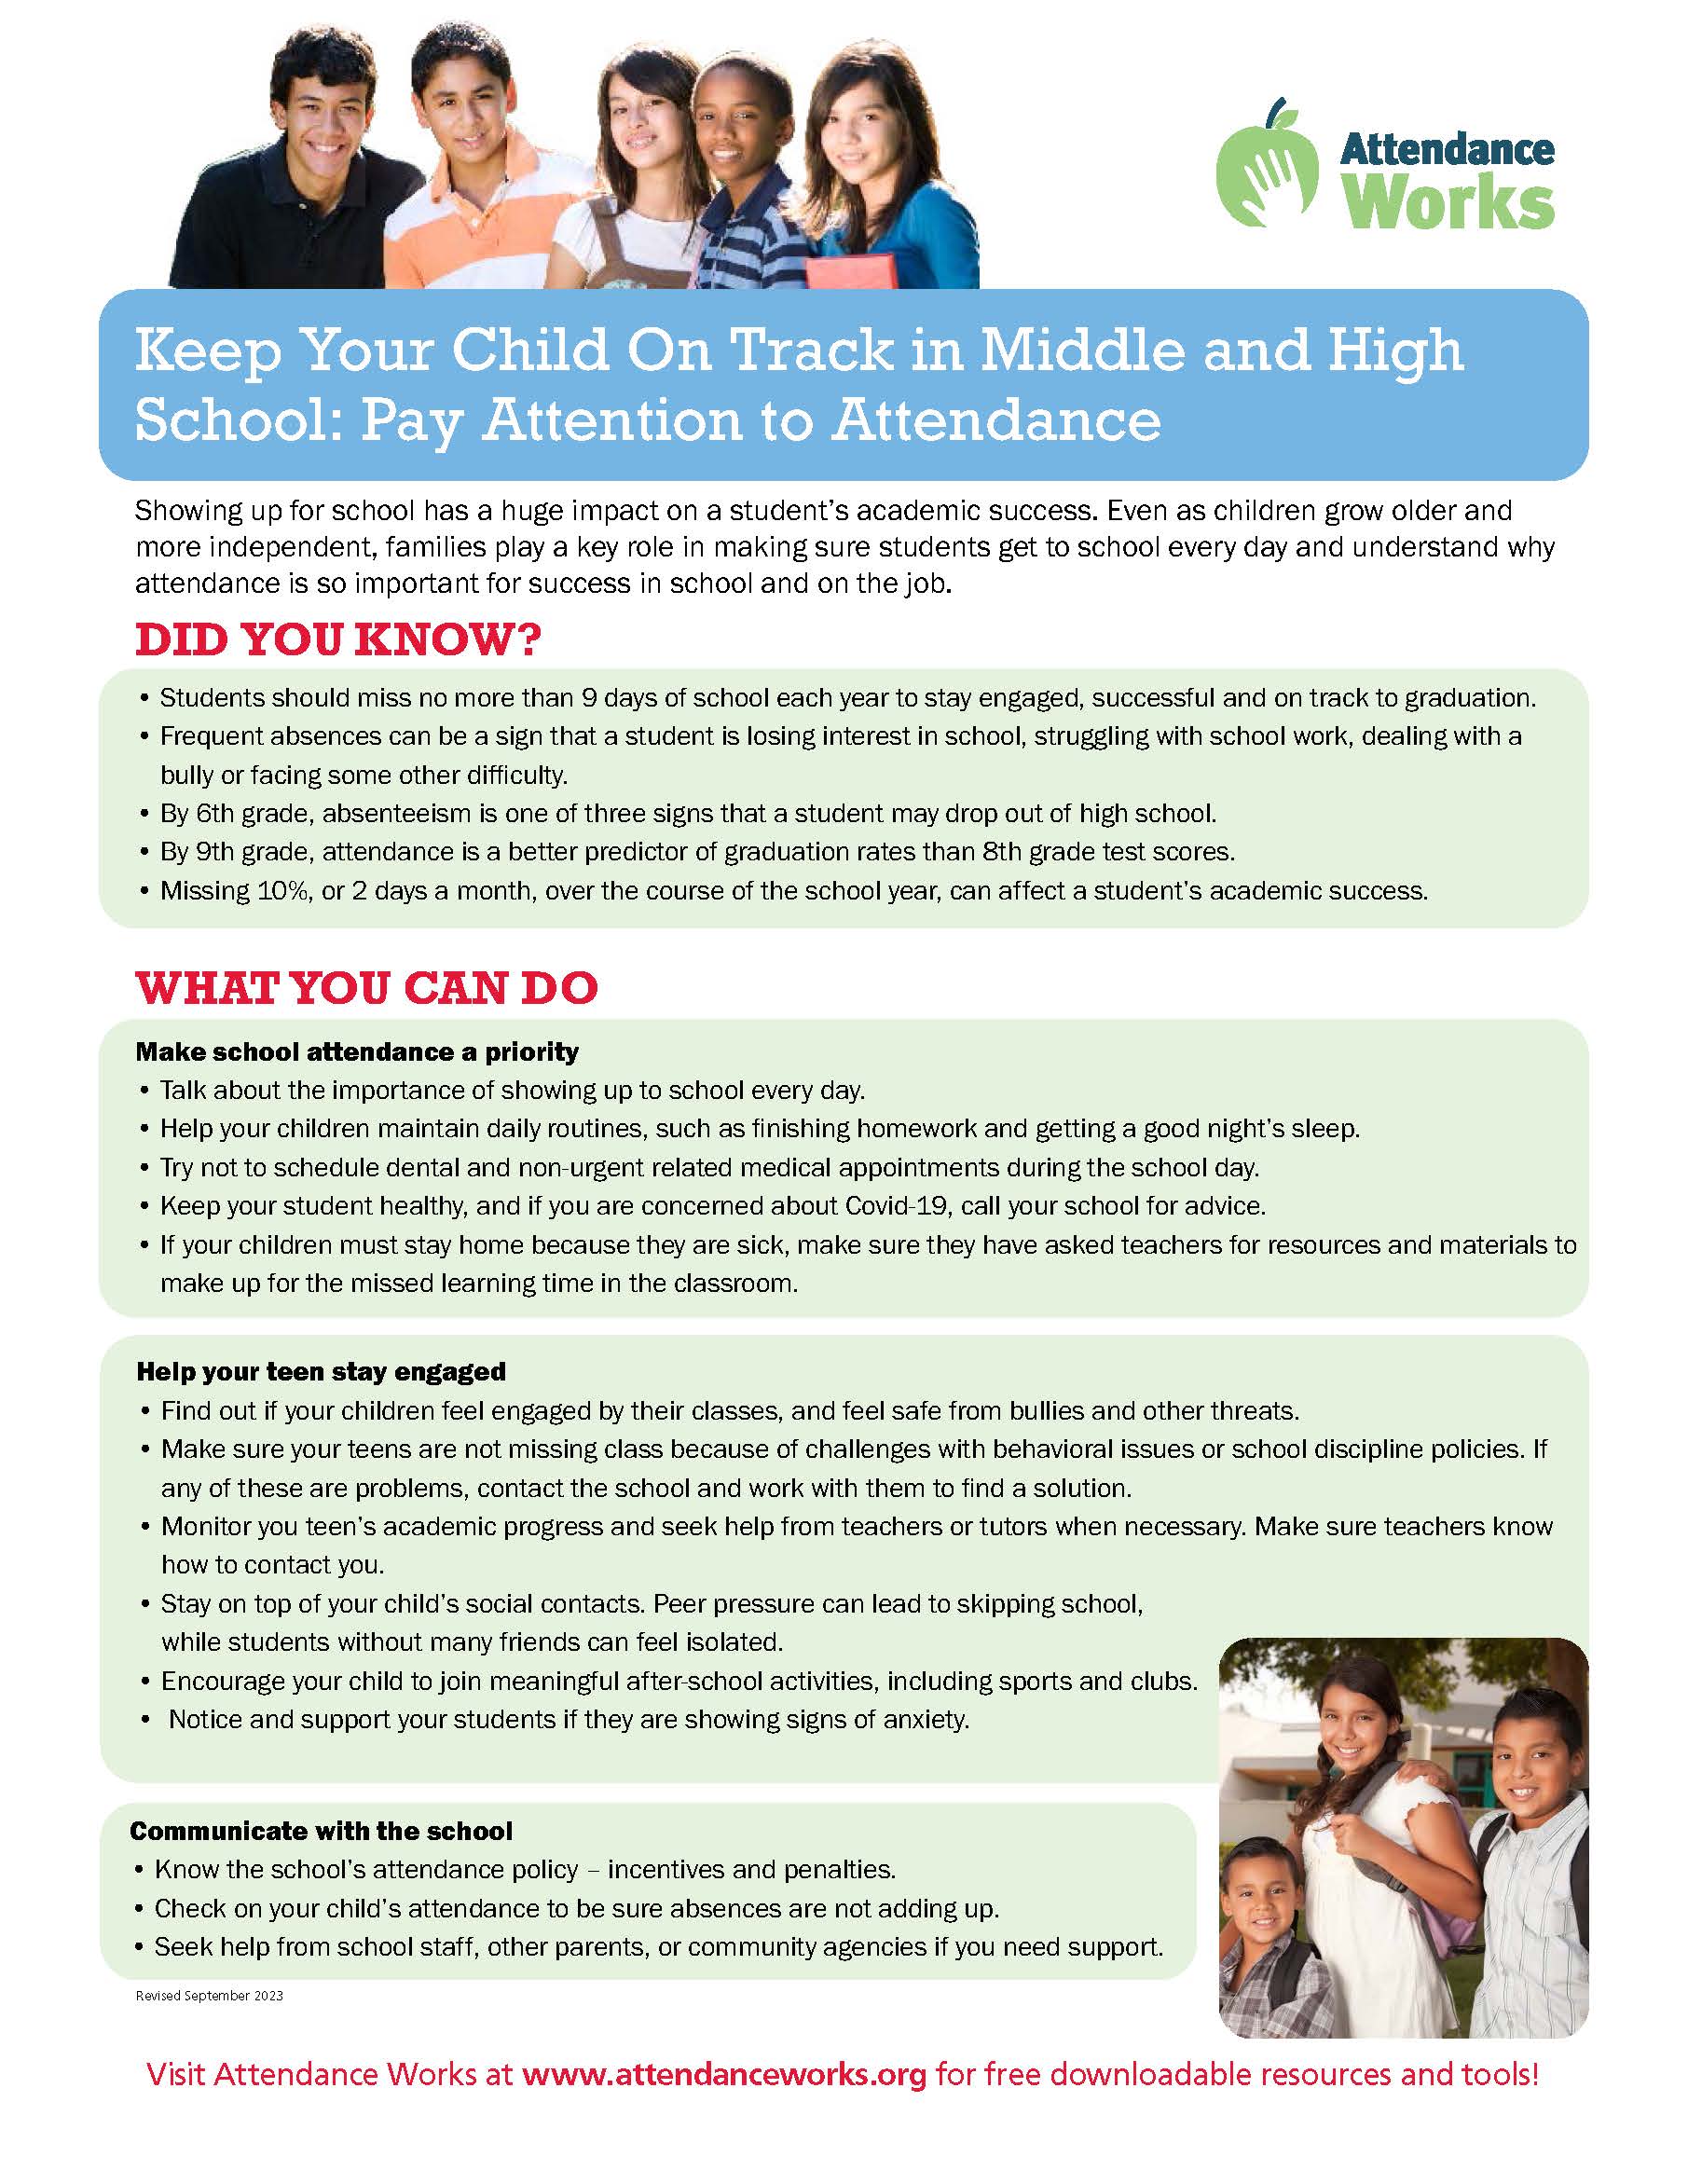 middle school and high school graphic Make school attendance a priority • Talk about the importance of showing up to school every day. • Help your children maintain daily routines, such as finishing homework and getting a good night’s sleep. • Try not to schedule dental and non-urgent related medical appointments during the school day. • Keep your student healthy, and if you are concerned about Covid-19, call your school for advice. • If your children must stay home because they are sick, make sure they have asked teachers for resources and materials to make up for the missed learning time in the classroom. Help your teen stay engaged • Find out if your children feel engaged by their classes, and feel safe from bullies and other threats. • Make sure your teens are not missing class because of challenges with behavioral issues or school discipline policies. If any of these are problems, contact the school and work with them to find a solution. • Monitor you teen’s academic progress and seek help from teachers or tutors when necessary. Make sure teachers know how to contact you. • Stay on top of your child’s social contacts. Peer pressure can lead to skipping school, while students without many friends can feel isolated. • Encourage your child to join meaningful after-school activities, including sports and clubs. • Notice and support your students if they are showing signs of anxiety. Communicate with the school • Know the school’s attendance policy – incentives and penalties. • Check on your child’s attendance to be sure absences are not adding up. • Seek help from school staff, other parents, or community agencies if you need support. Visit Attendance Works at www.attendanceworks.org for free downloadable resources and tools!